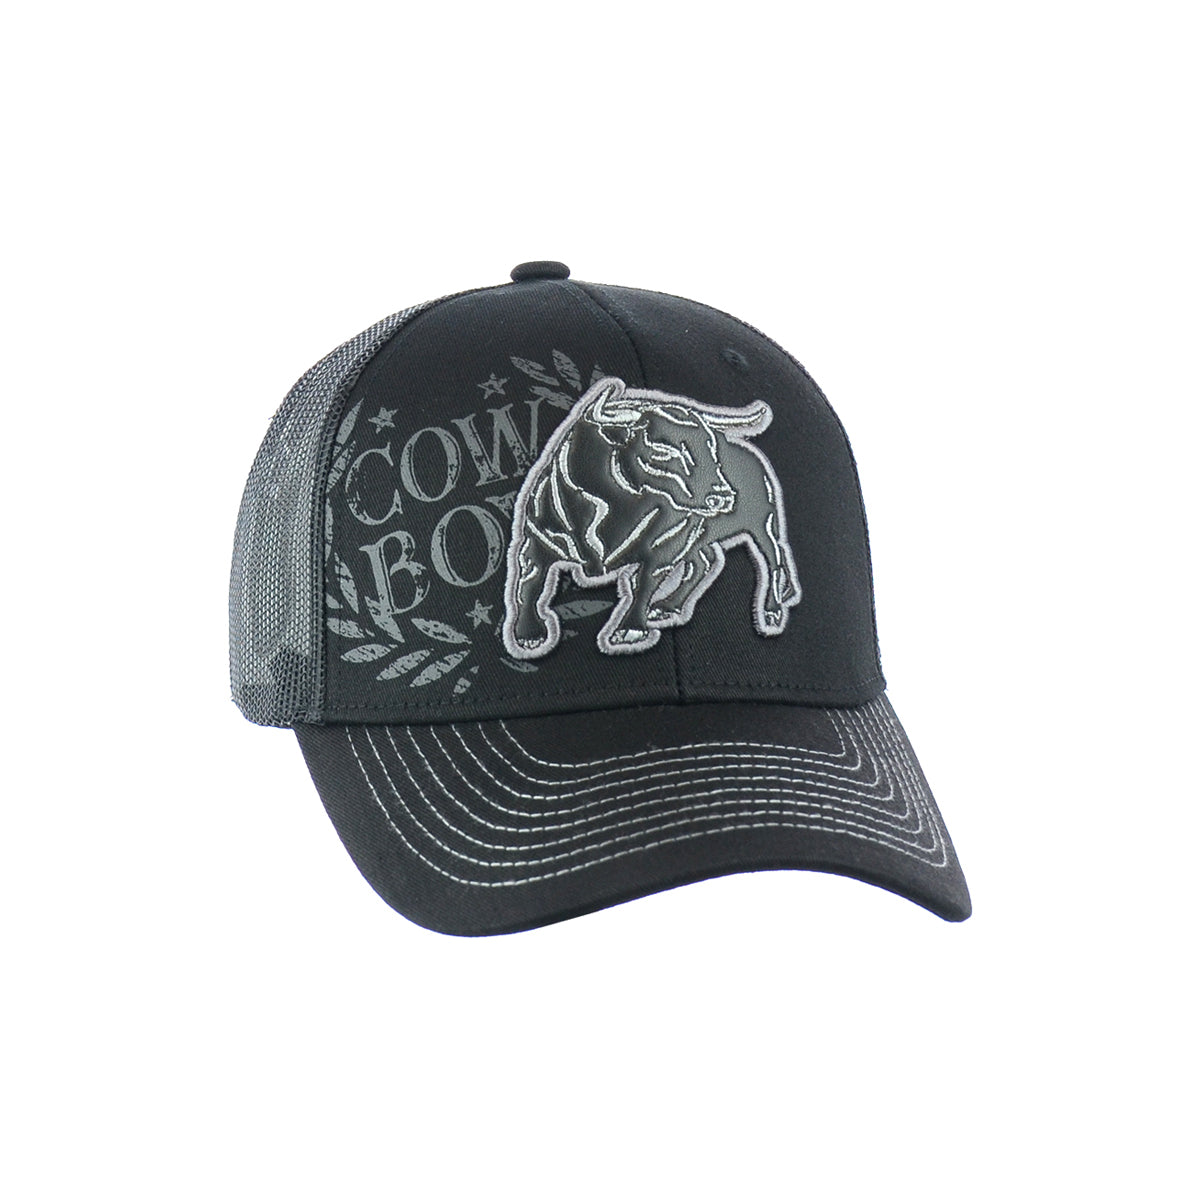 Bull Hat Embroidered Snapback